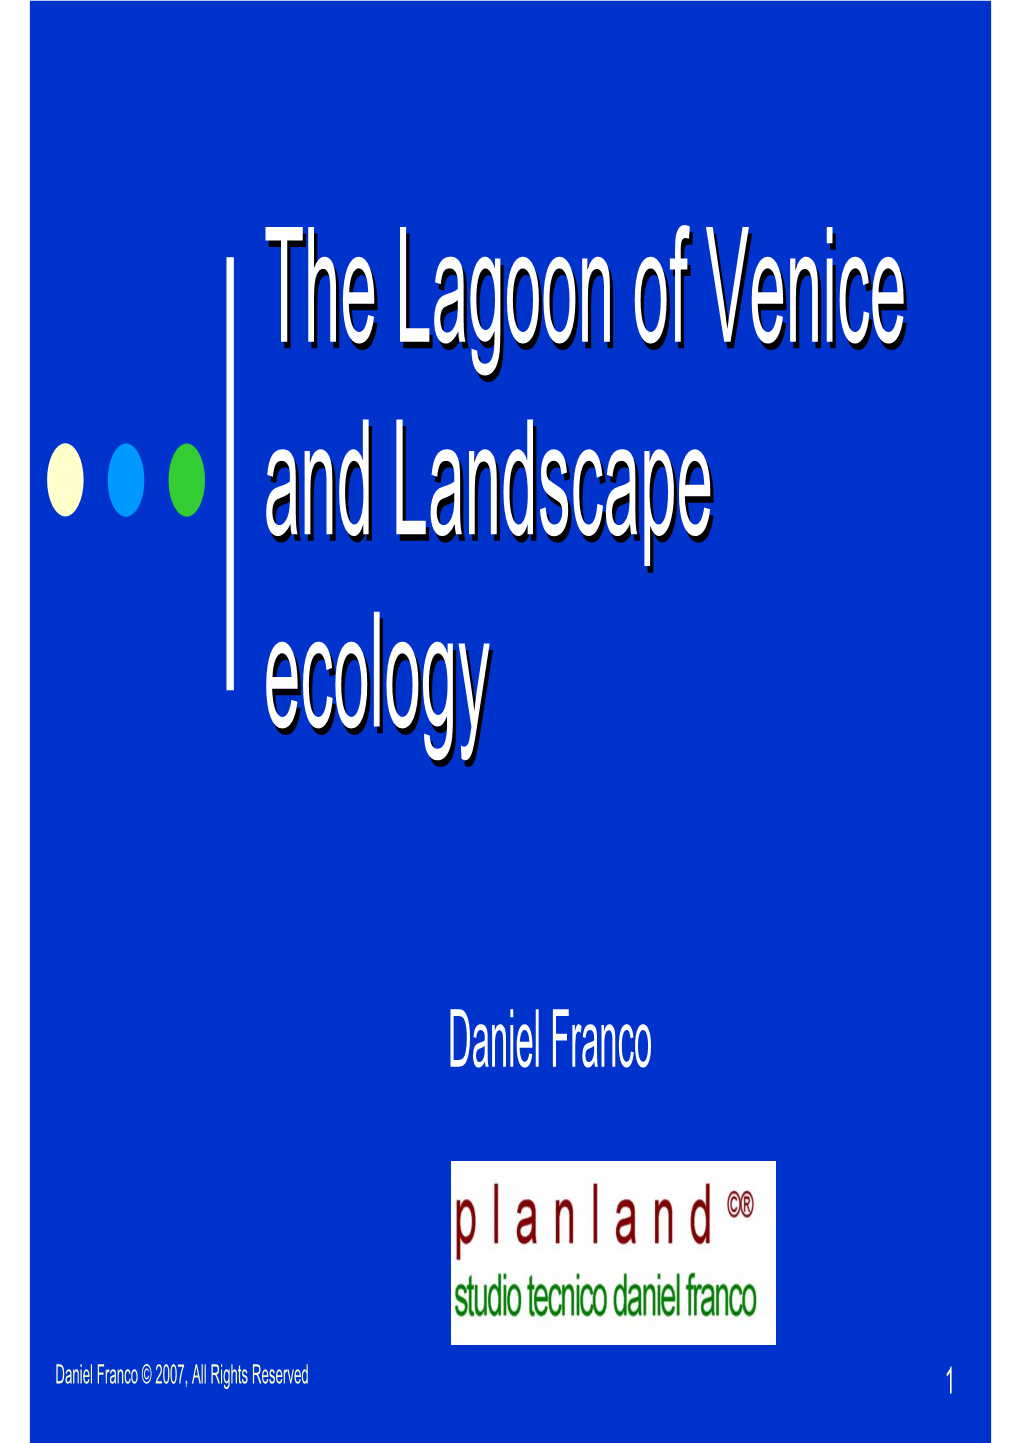 The Lagoon of Venice and Landscape Ecology